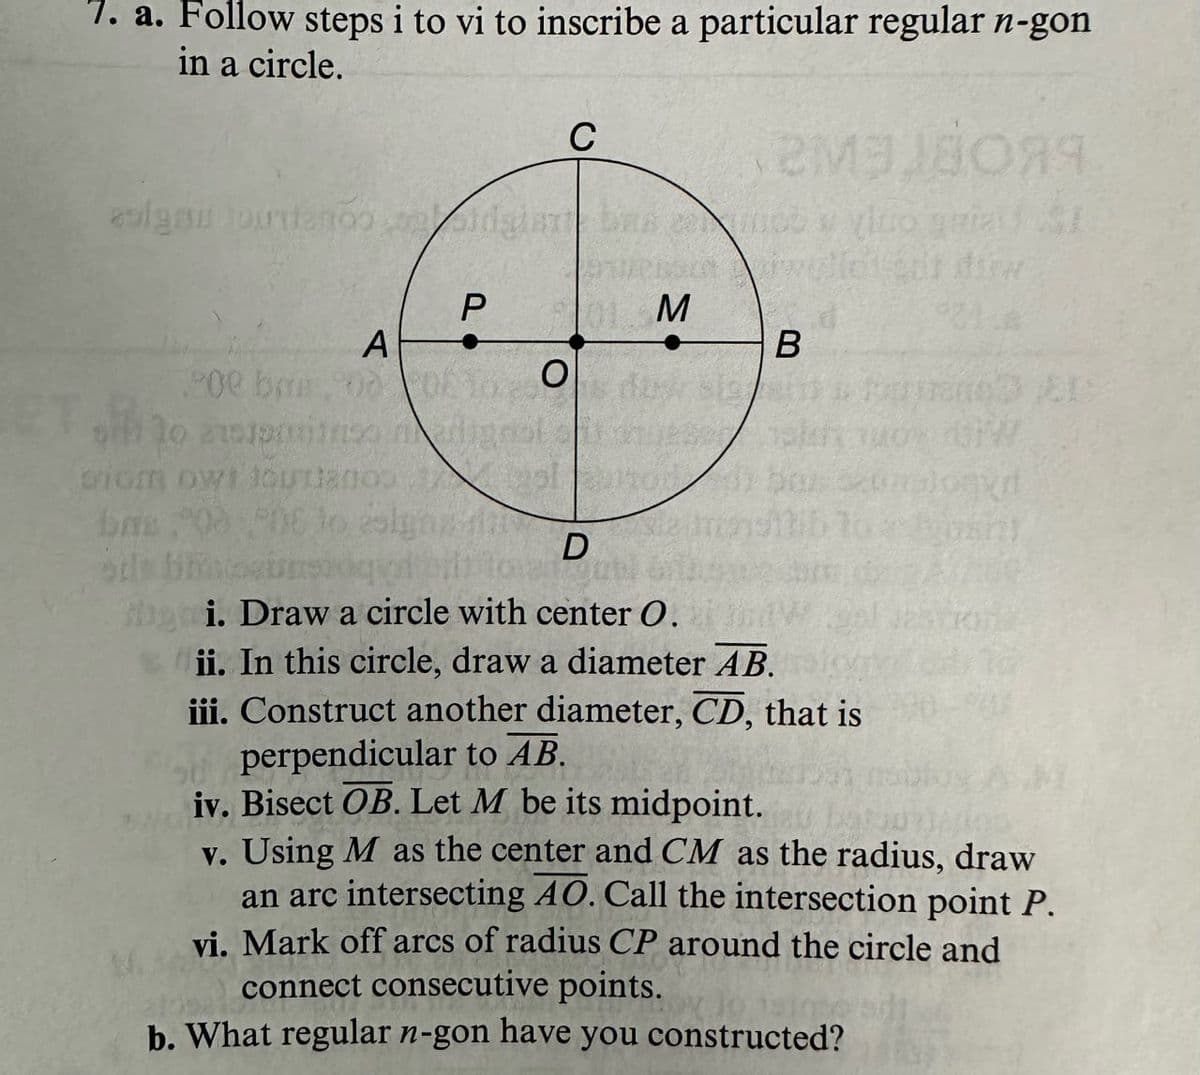 7. a. Follow steps i to vi to inscribe a particular regular n-gon
in a circle.
C
P
01 M
A
B
900 bm00 DE 10s du sig
0
crium owt toutano
6.00 POE to signs
D
sils bouts
of bit to
gubl
doqyrt
Яя
gi. Draw a circle with center O.
ii. In this circle, draw a diameter AB.
iii. Construct another diameter, CD, that is
perpendicular to AB.
iv. Bisect OB. Let M be its midpoint.
v. Using M as the center and CM as the radius, draw
an arc intersecting 40. Call the intersection point P.
vi. Mark off arcs of radius CP around the circle and
connect consecutive points.
b. What regular n-gon have you constructed?